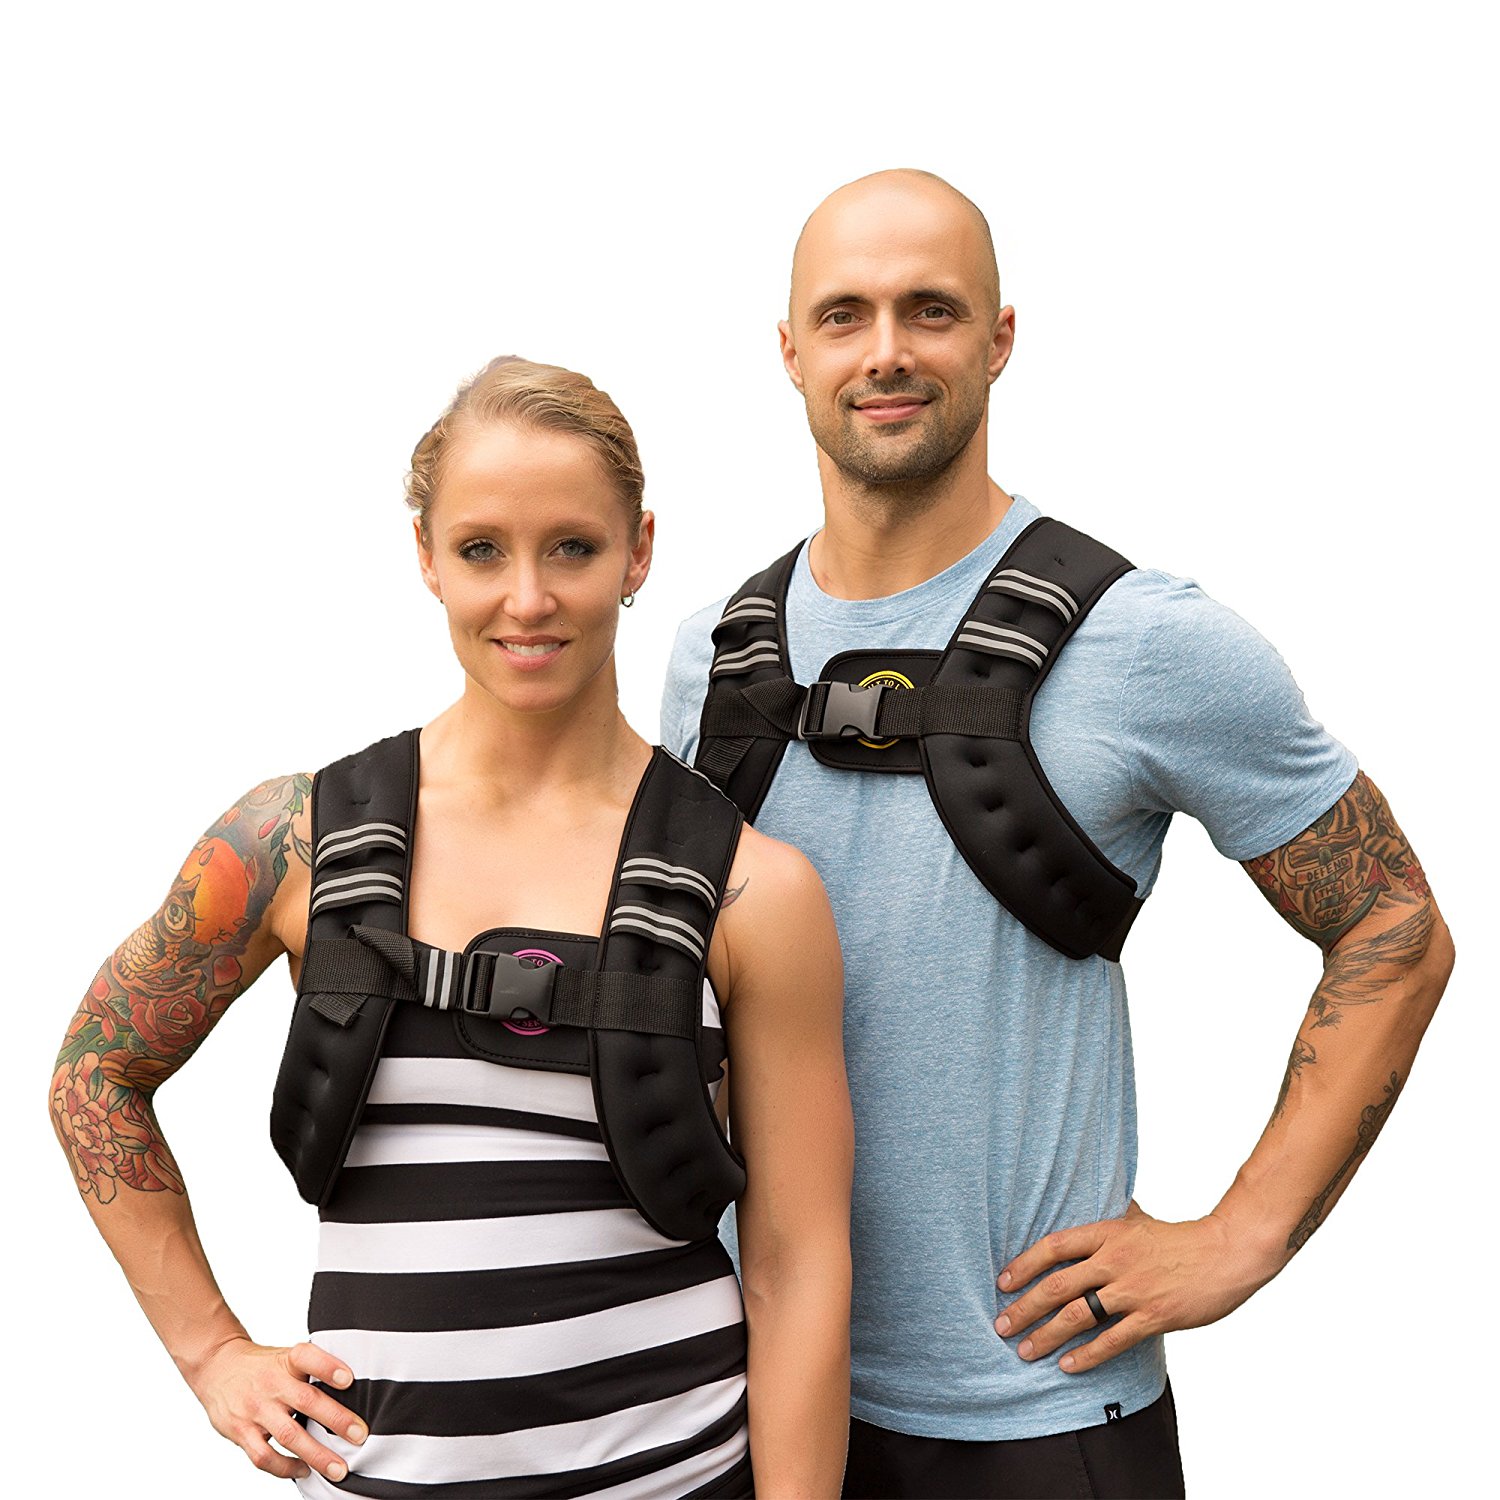 TNT Pro Series Launches Their First Ever Weighted Vests That Are ...